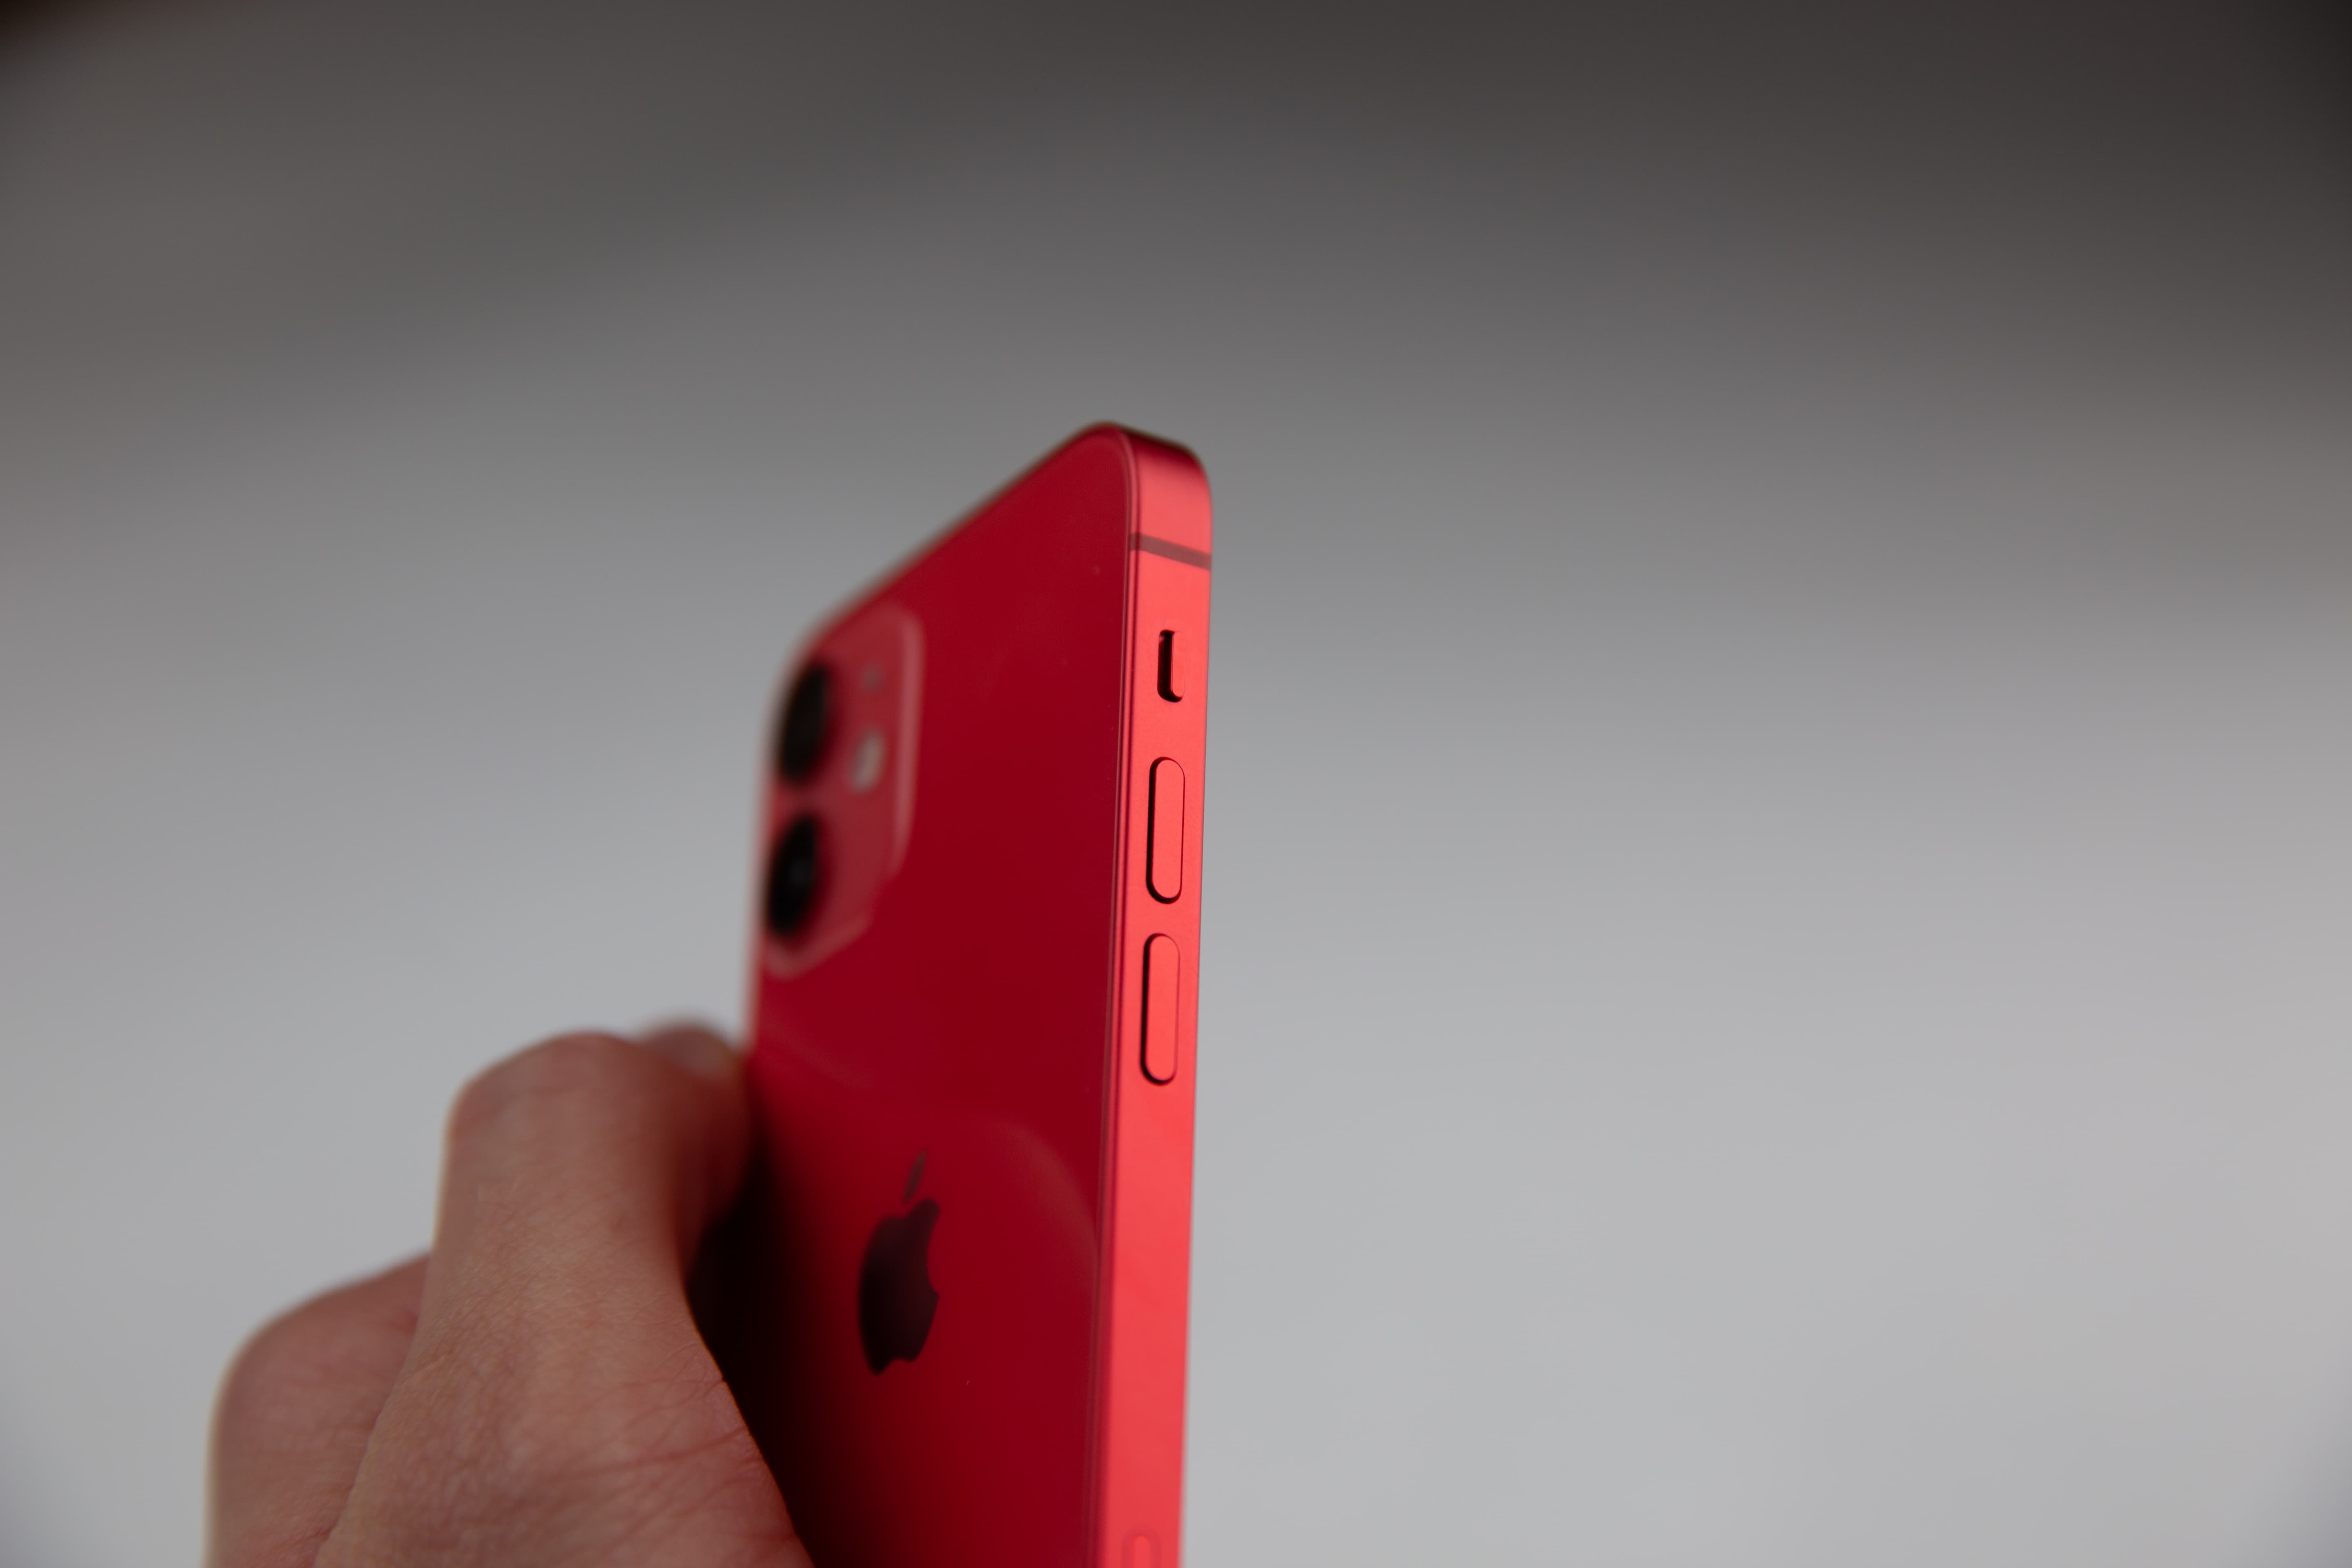 For one-handed iPhoning, the mini can't be beat.